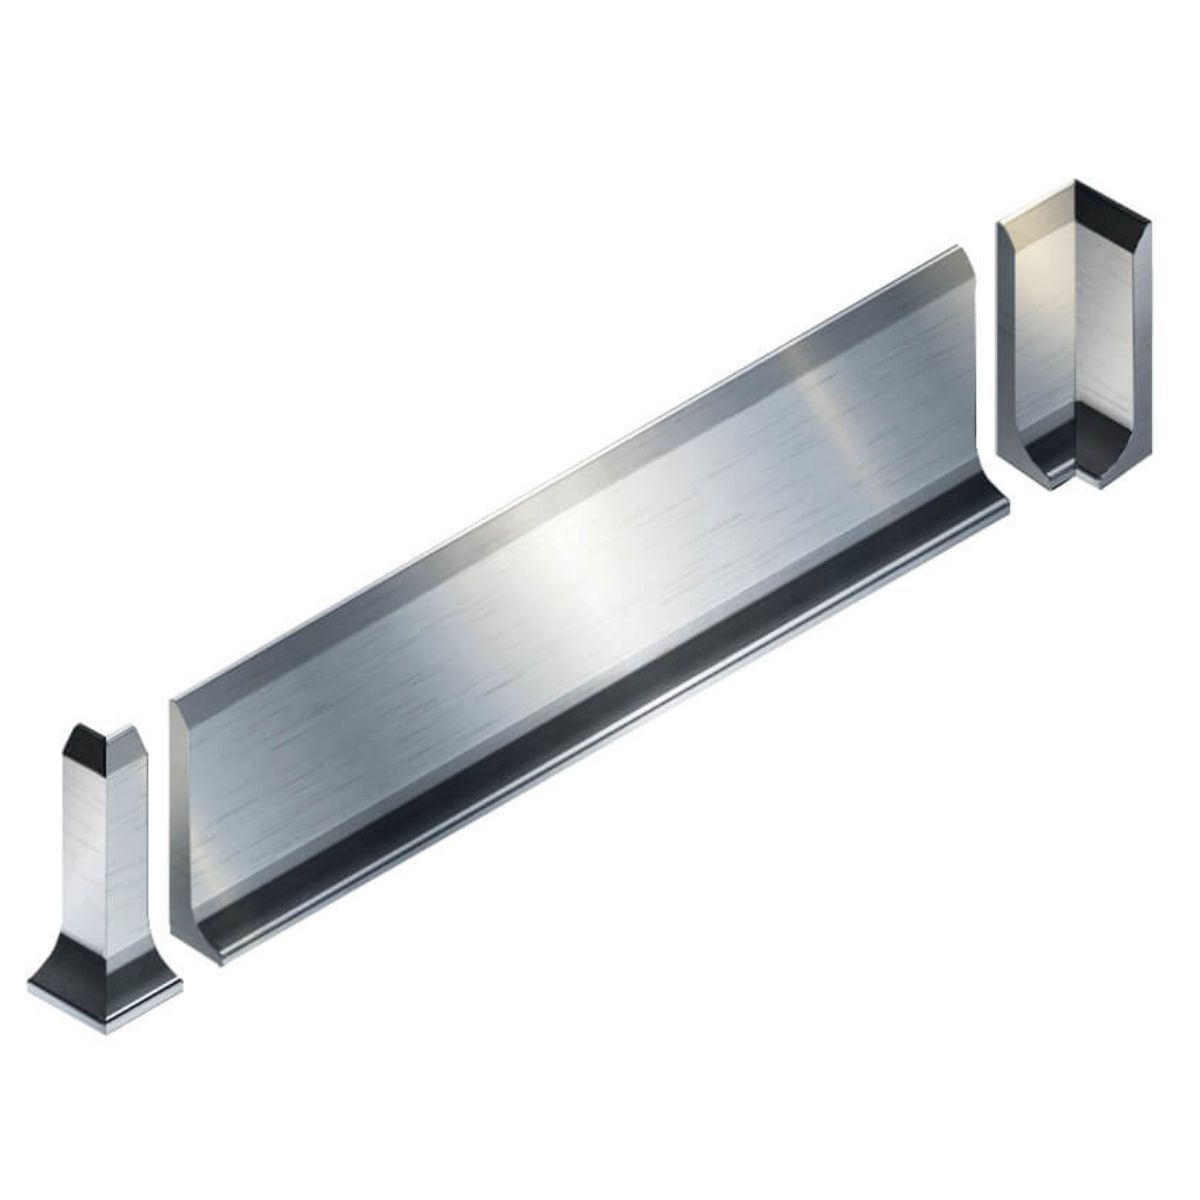 Board in AISI 304 stainless steel - resistant and hygienic –